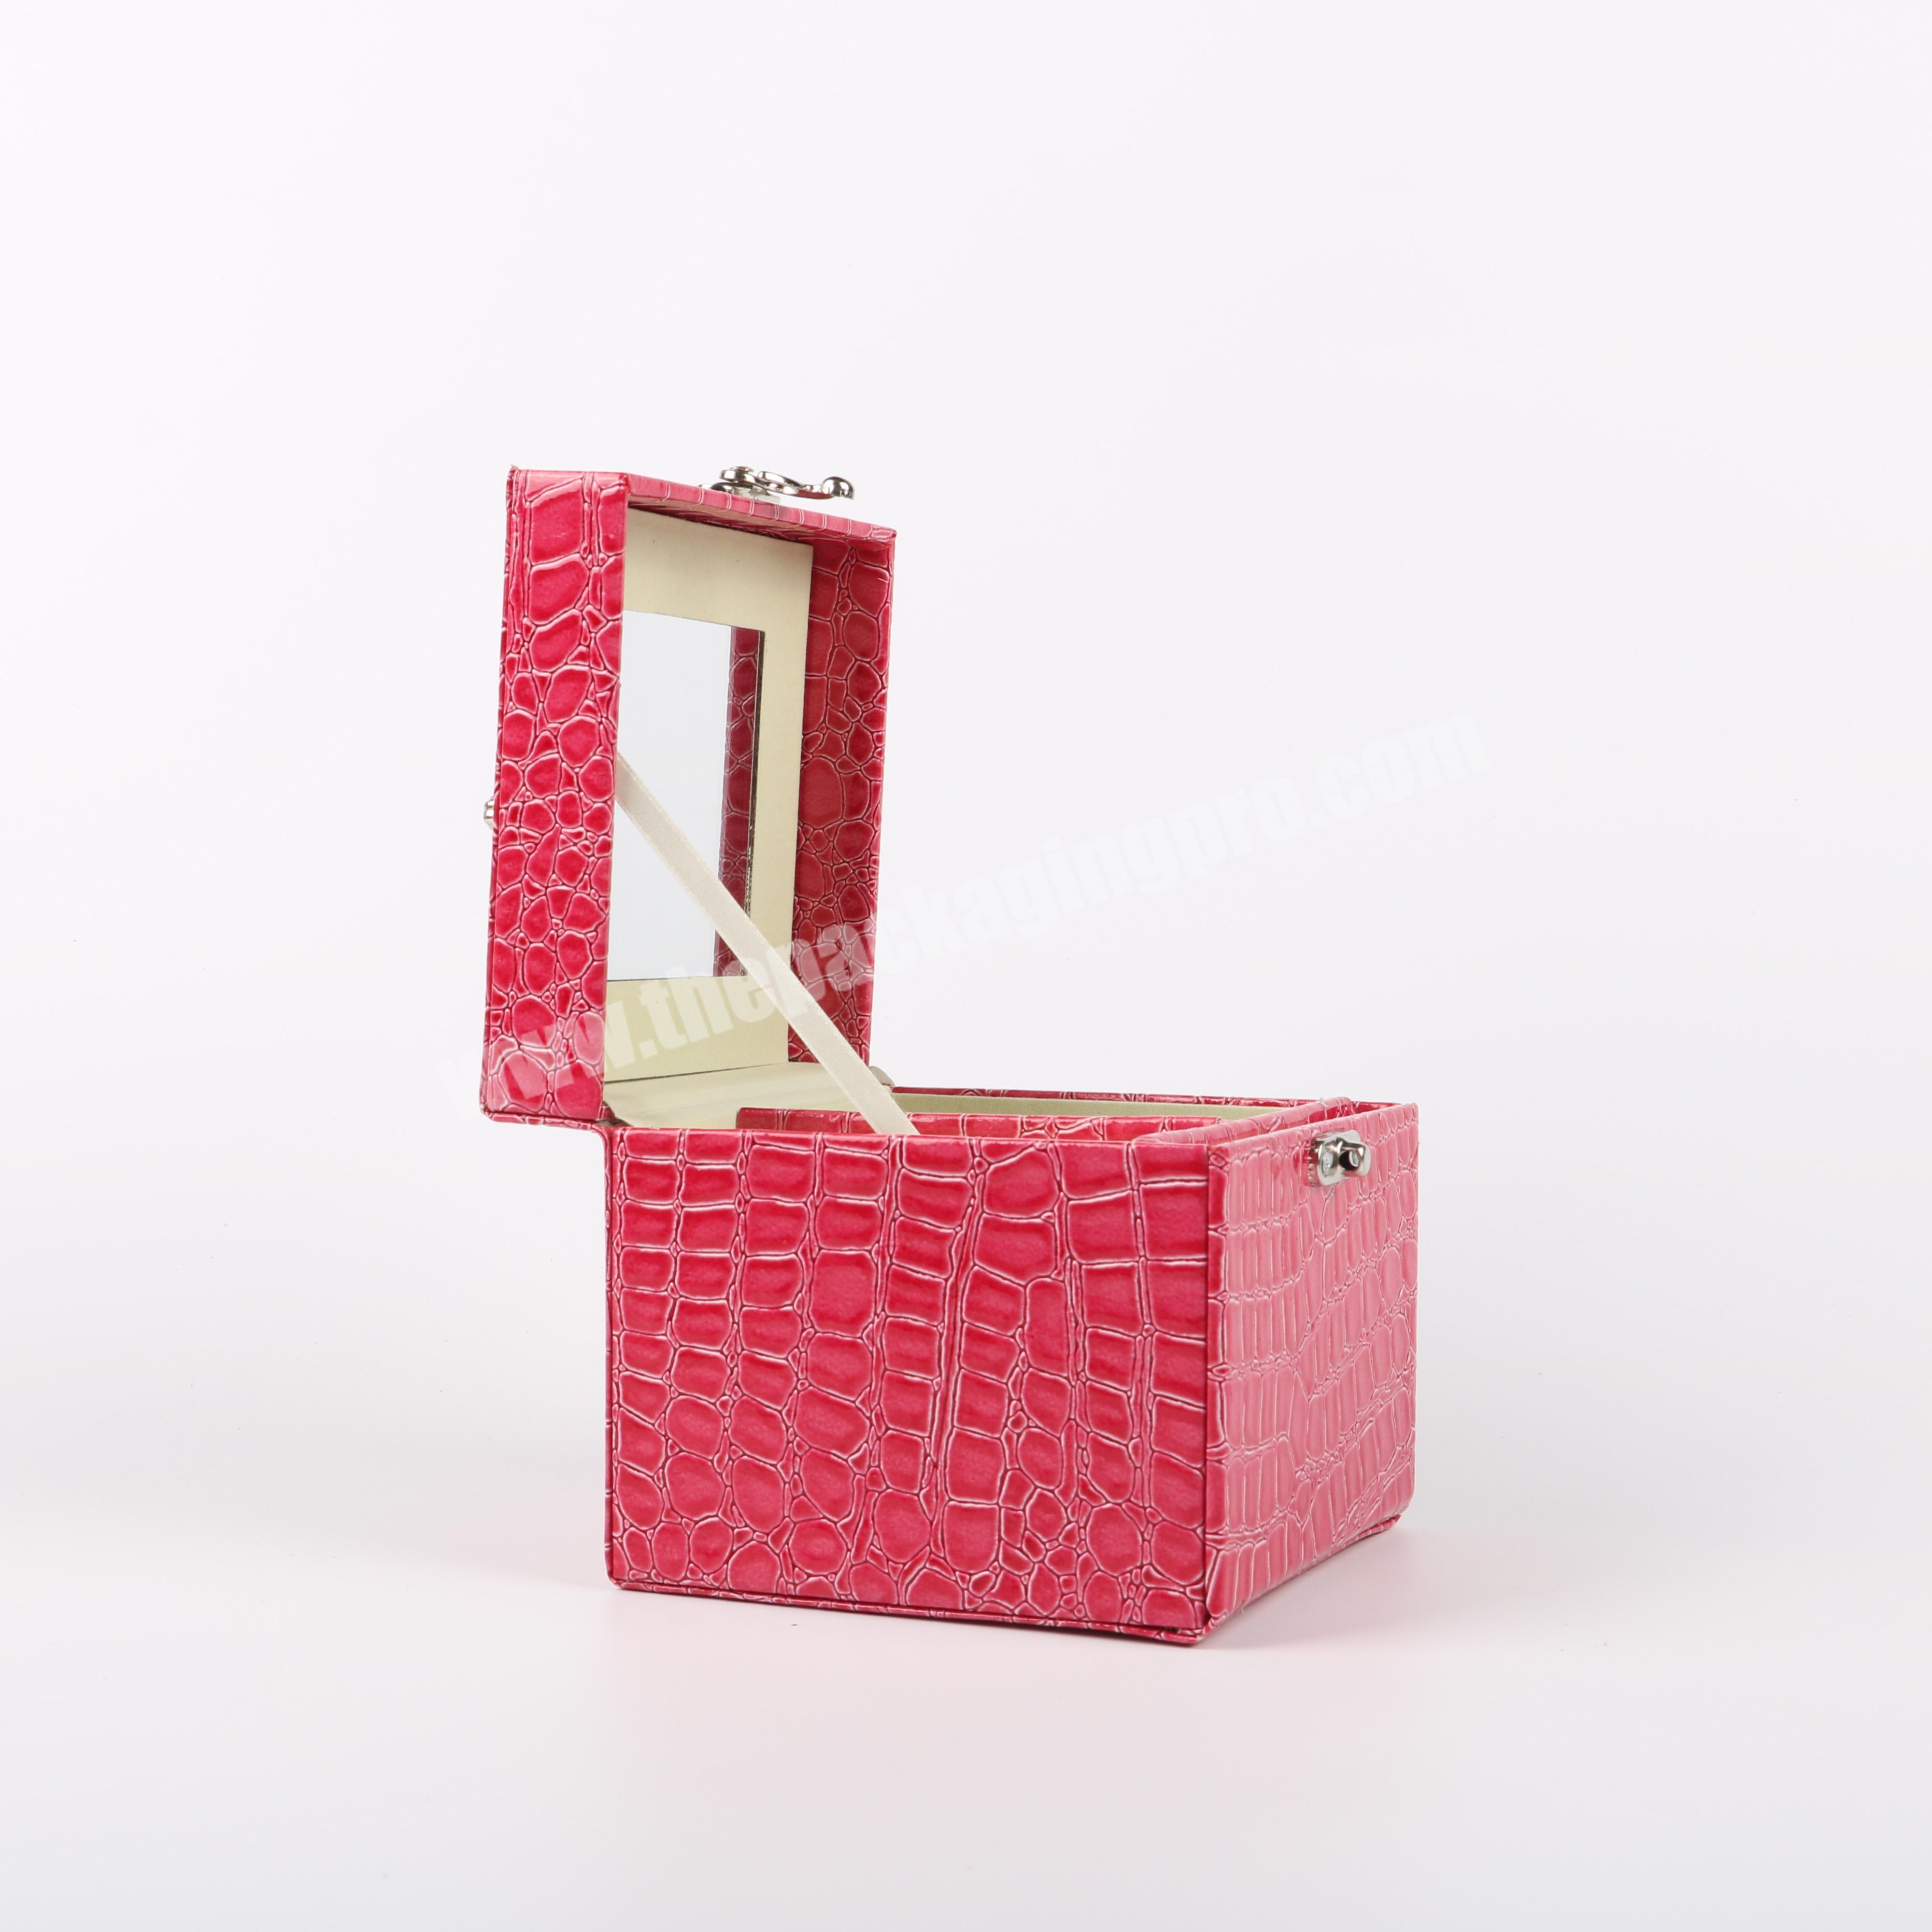 Louis Vuitton Gift Jewelry Boxes & Organizers